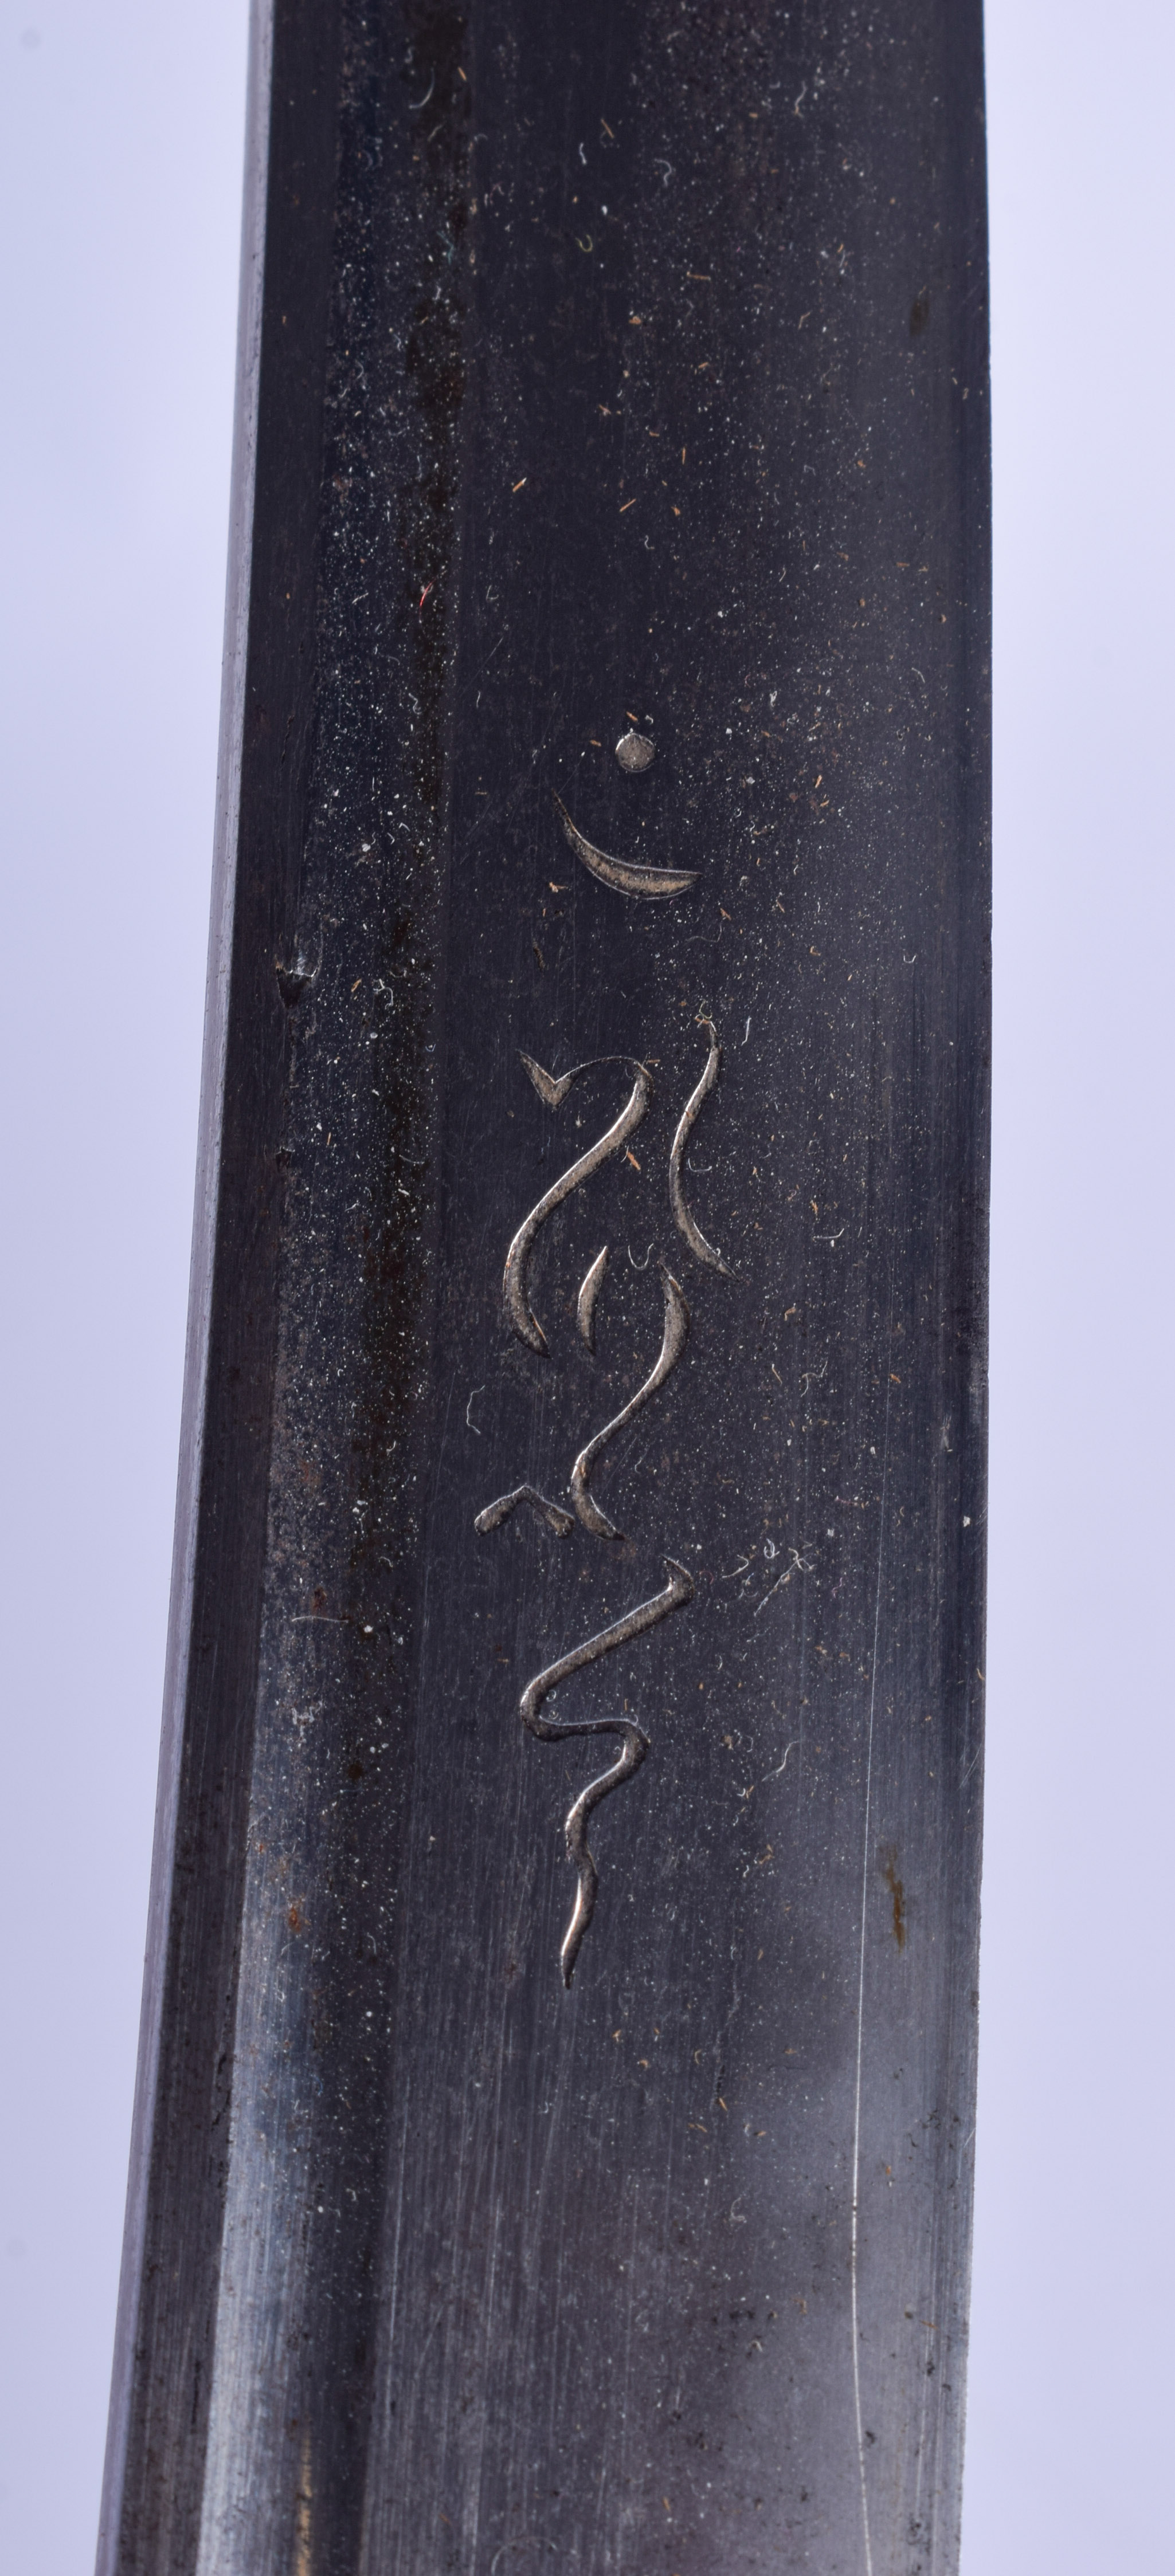 A FINE 19TH CENTURY JAPANESE MEIJI PERIOD BRONZE SAMURAI SWORD with ray skin handle and gold inlaid - Image 6 of 24